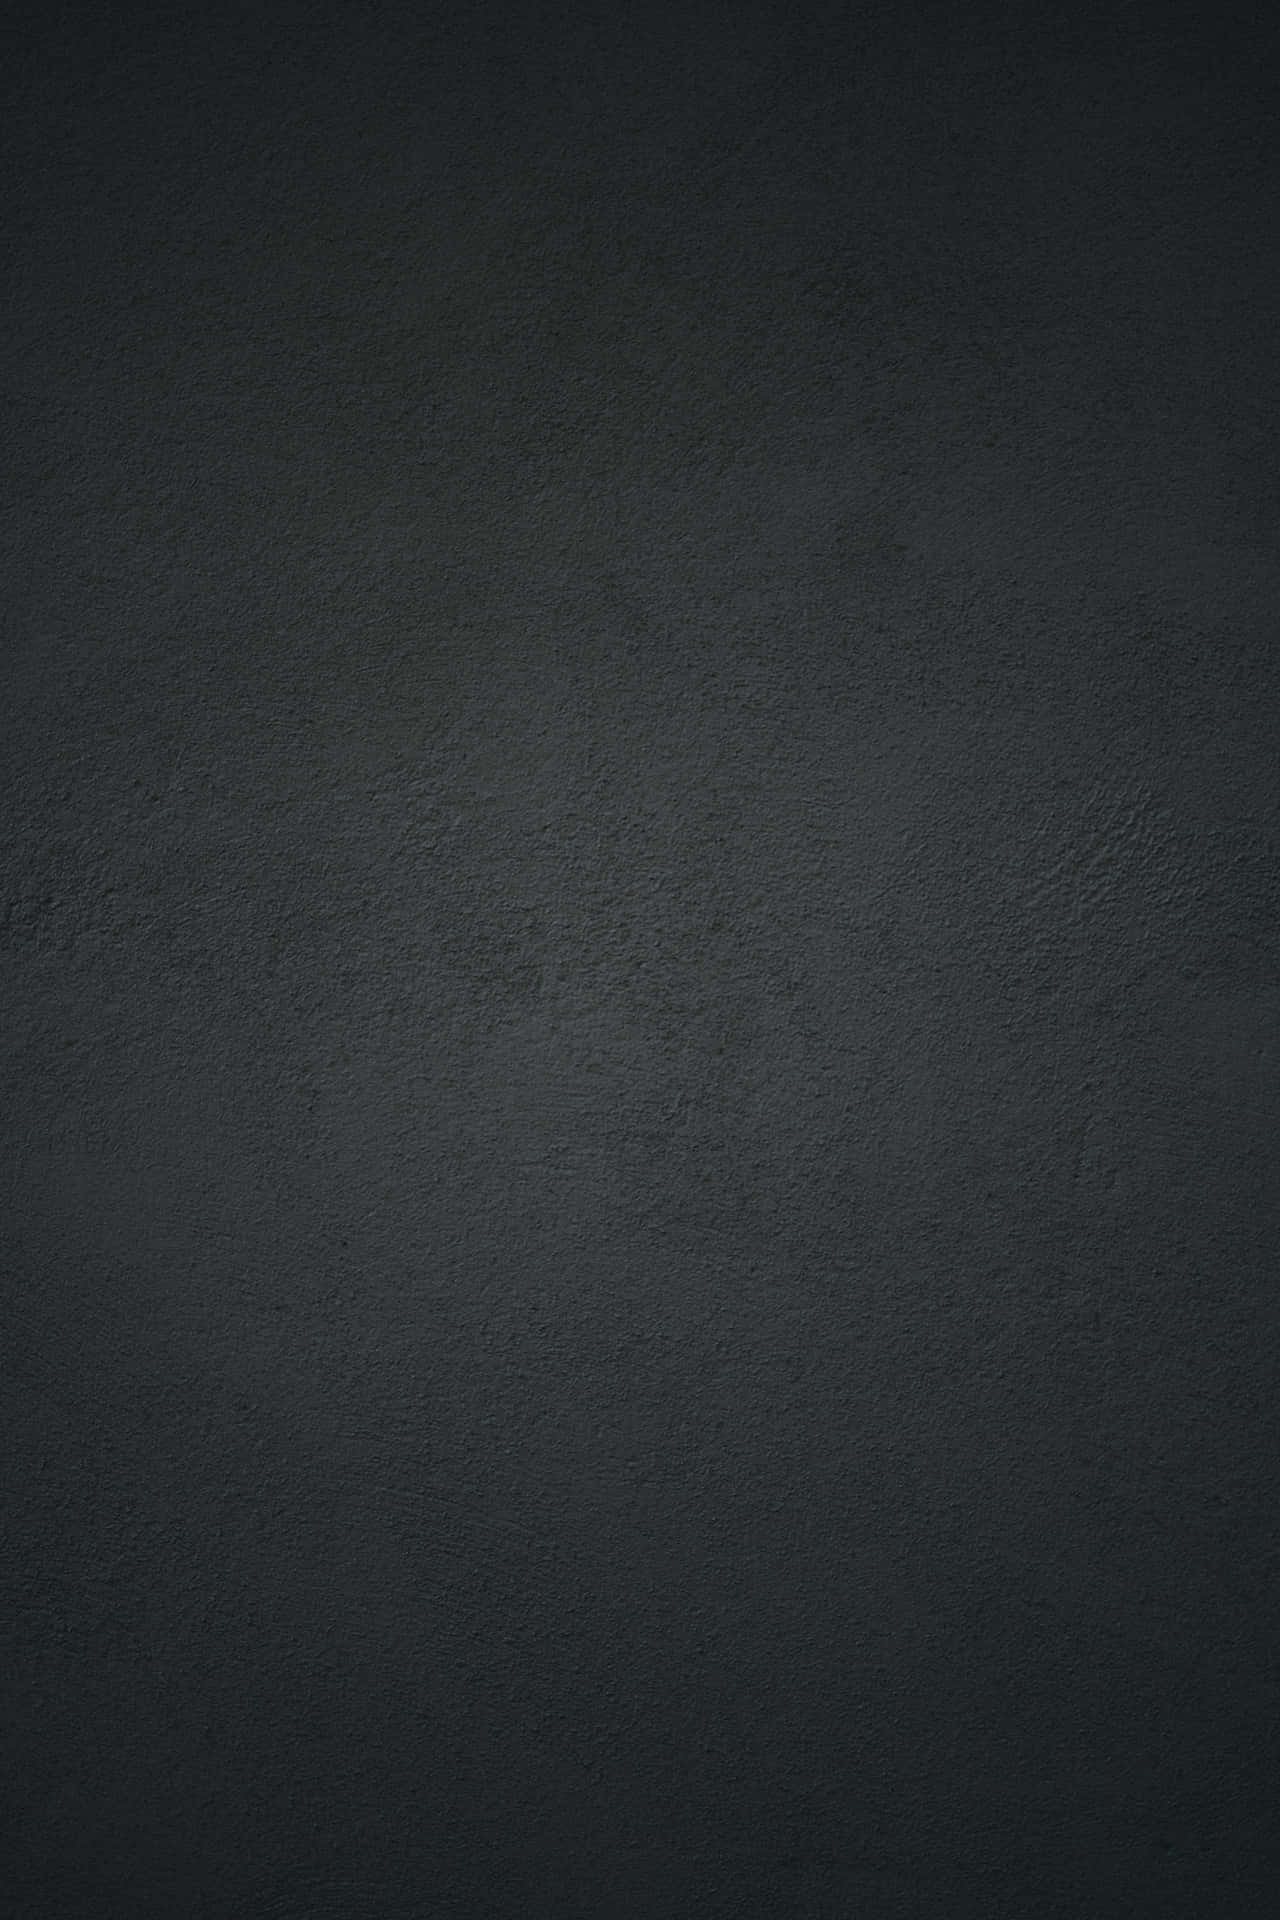 Black Concrete Wall Background With A Light Reflection